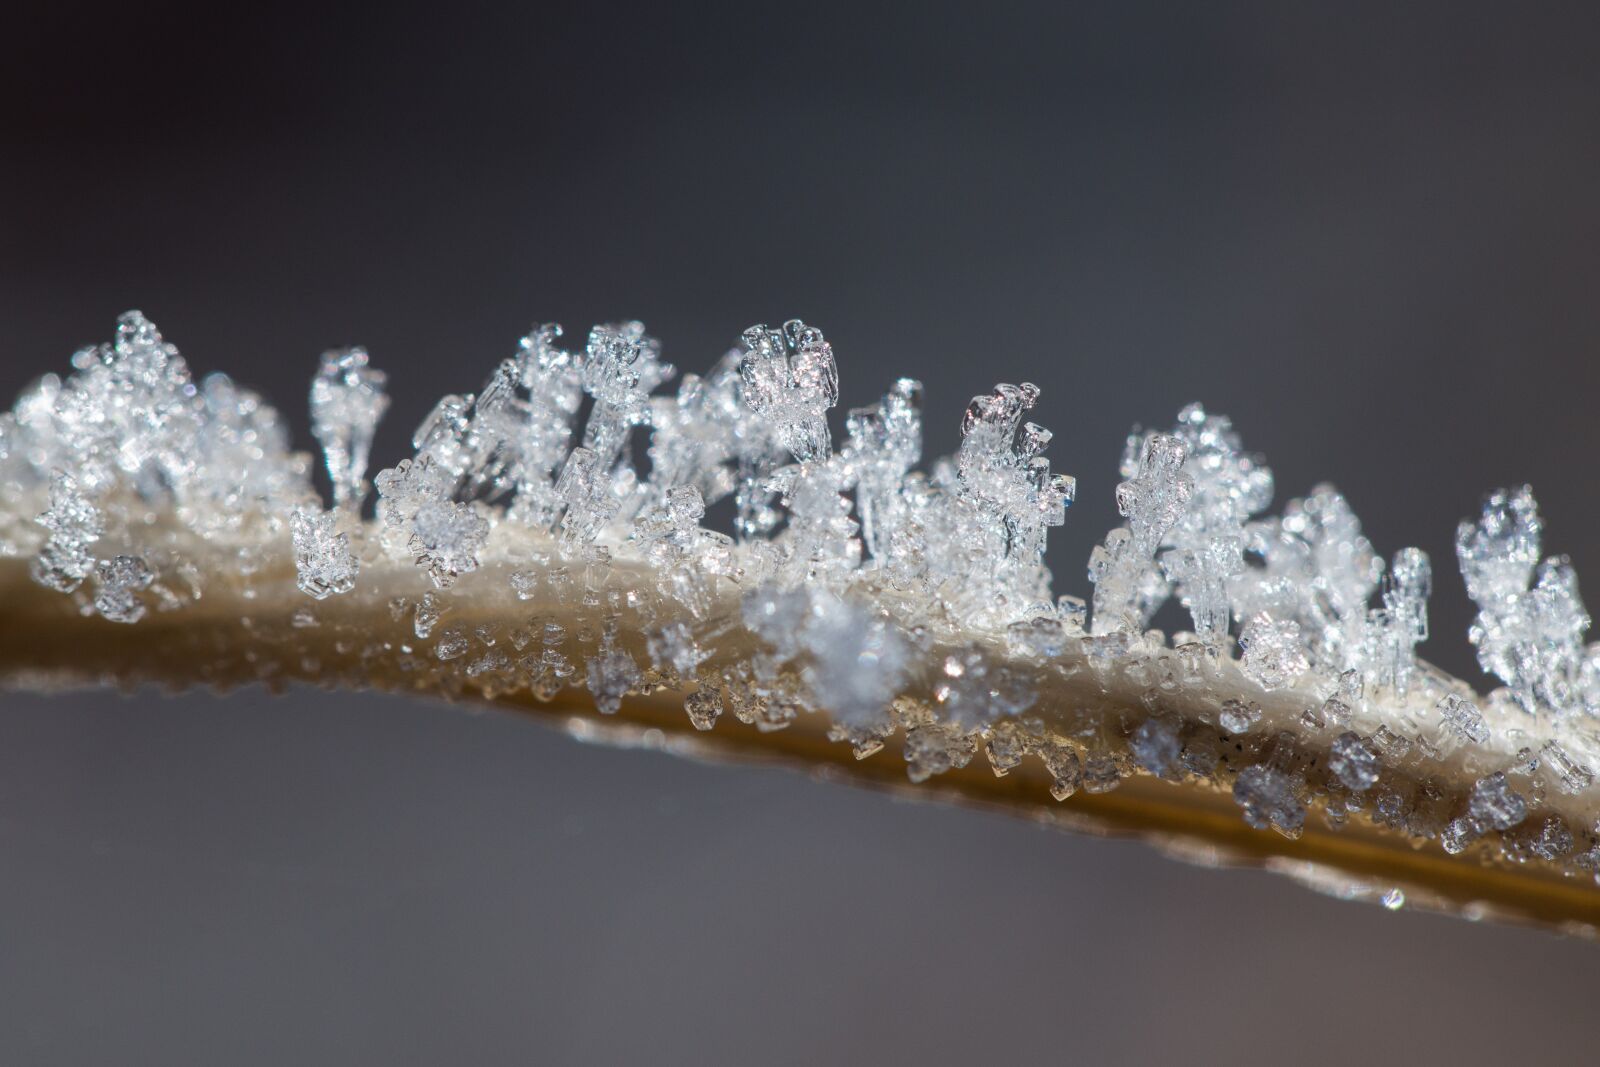 Sony a7R II + Sony DT 50mm F1.8 SAM sample photo. Ice, crystals, winter photography